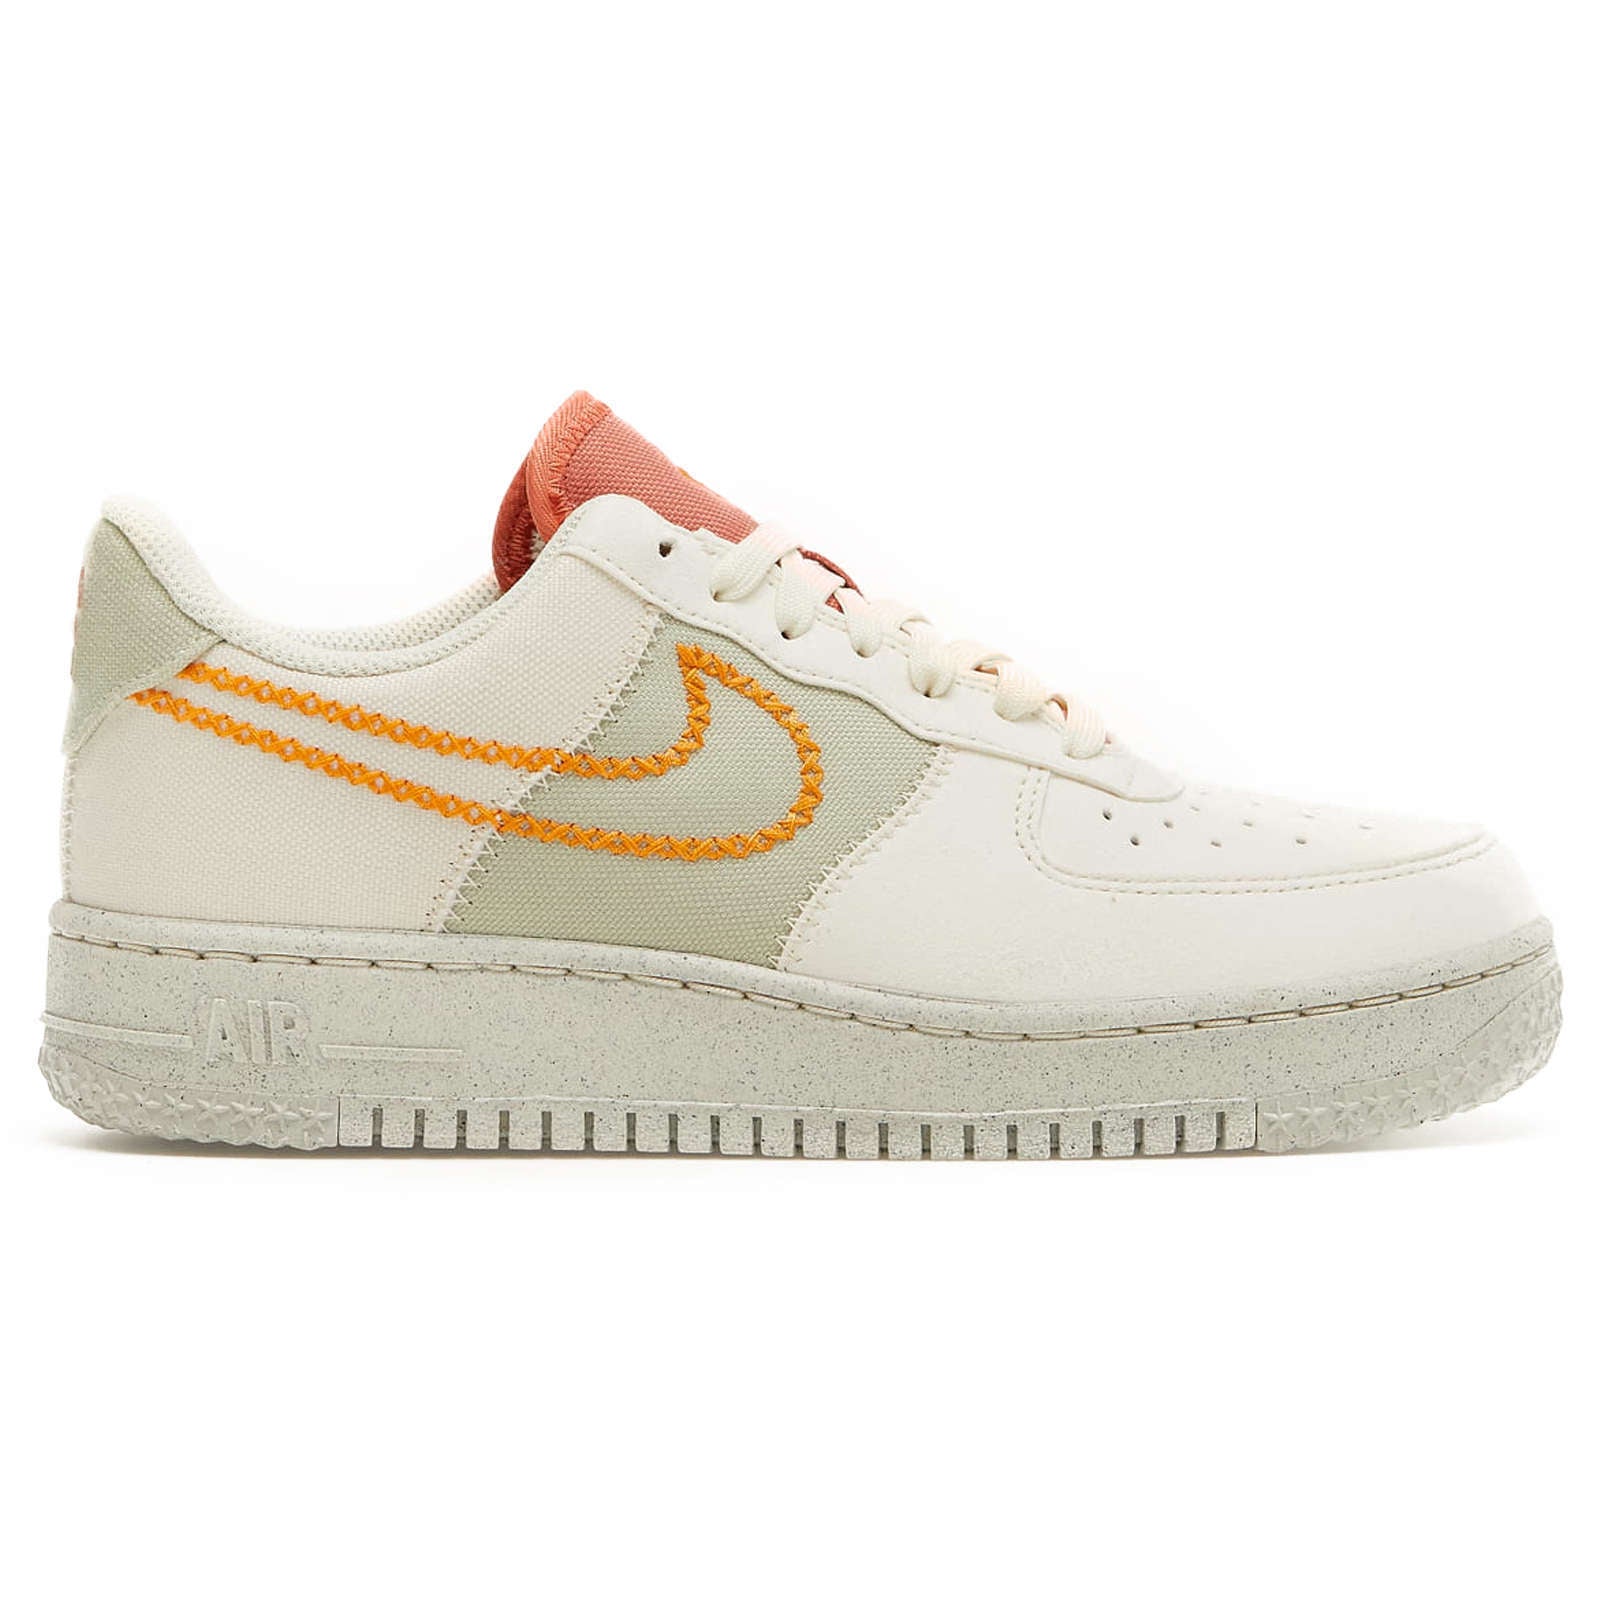 Nike Air Force 1 07 Low Leather Synthetic Trainers